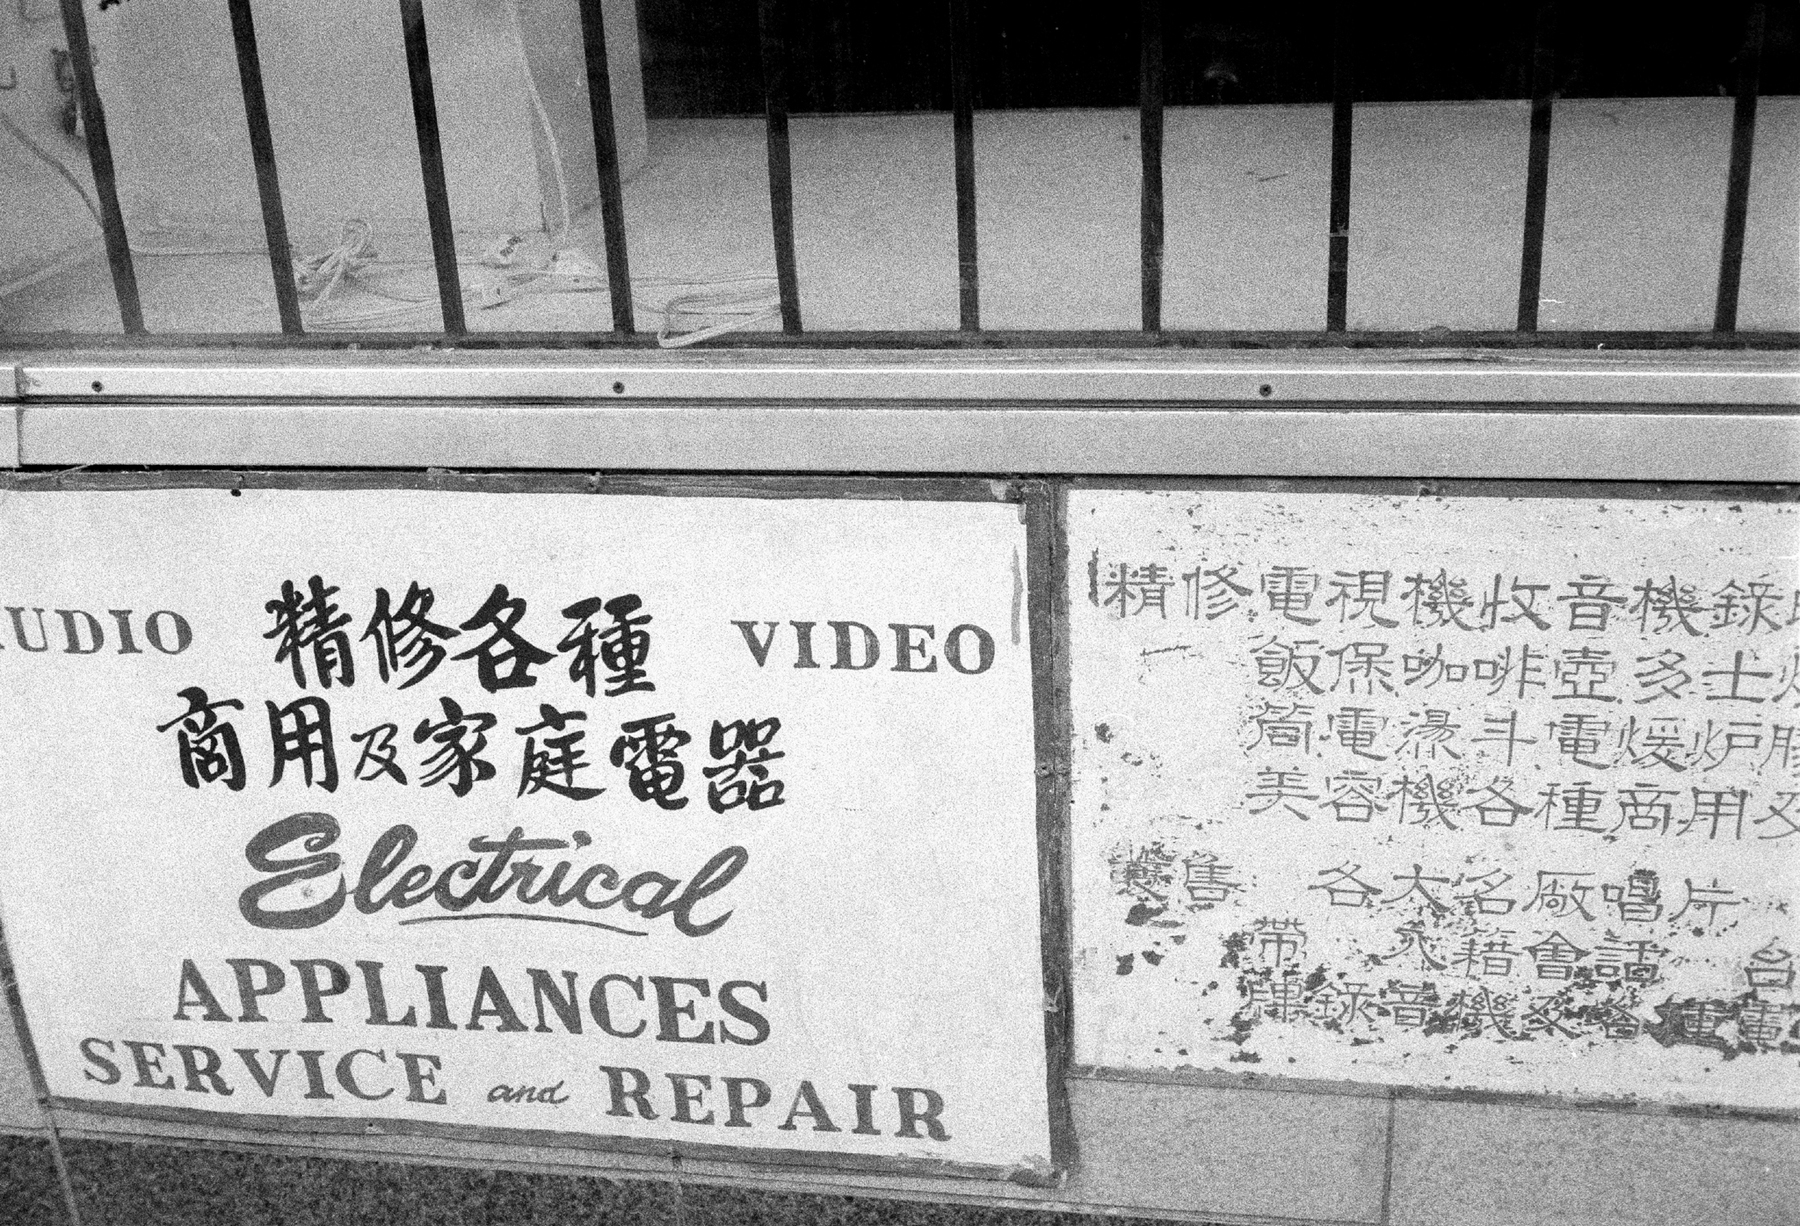 a scan of a black and white photo showing a vintage sign in English and Chinese characters mentioning audio video repair services